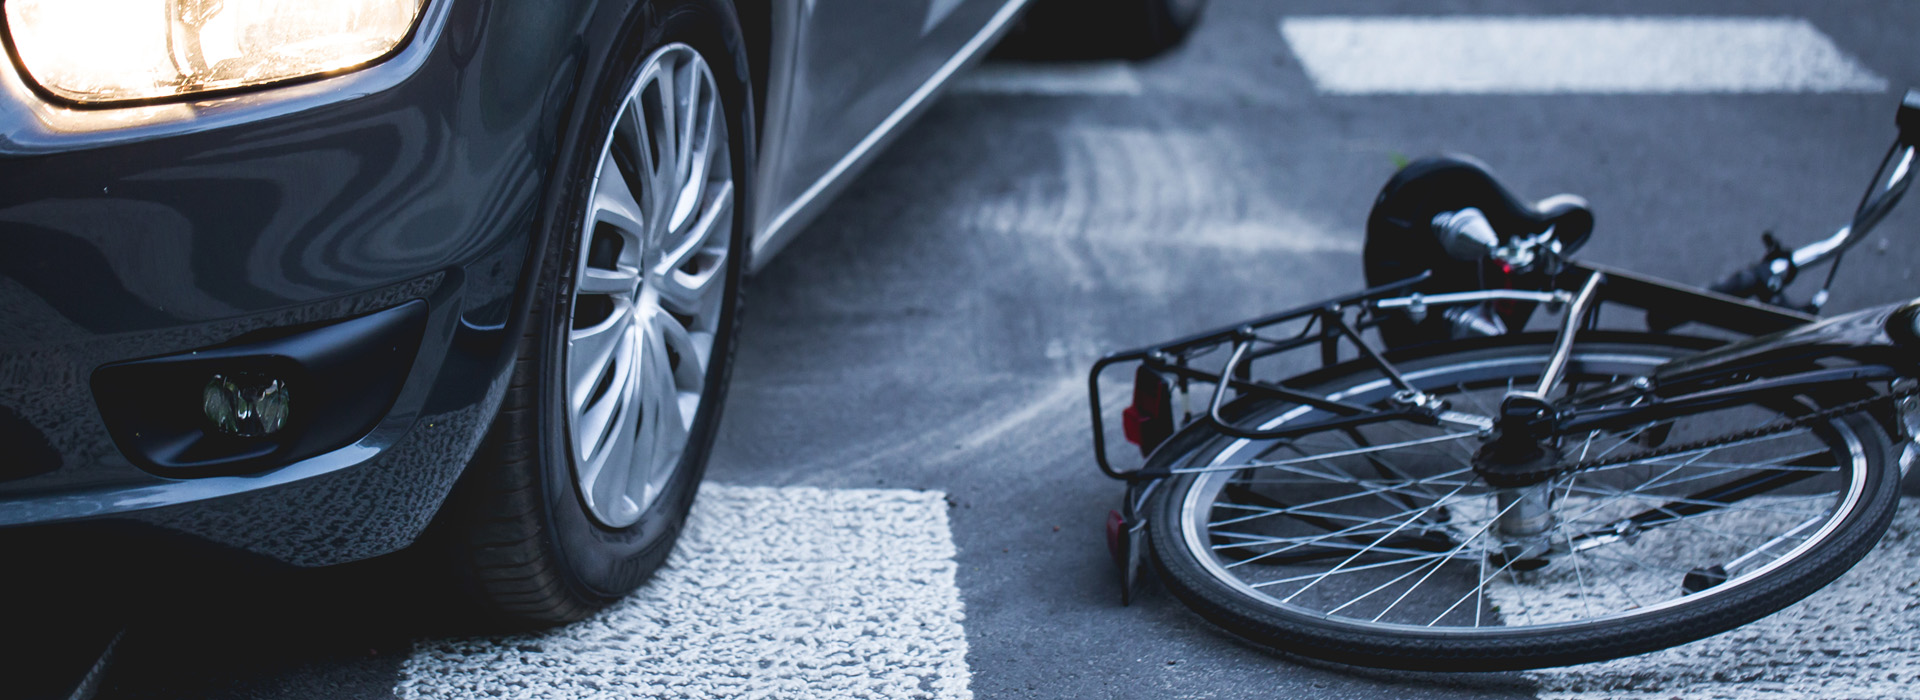 Bicyclist Killed in Accident